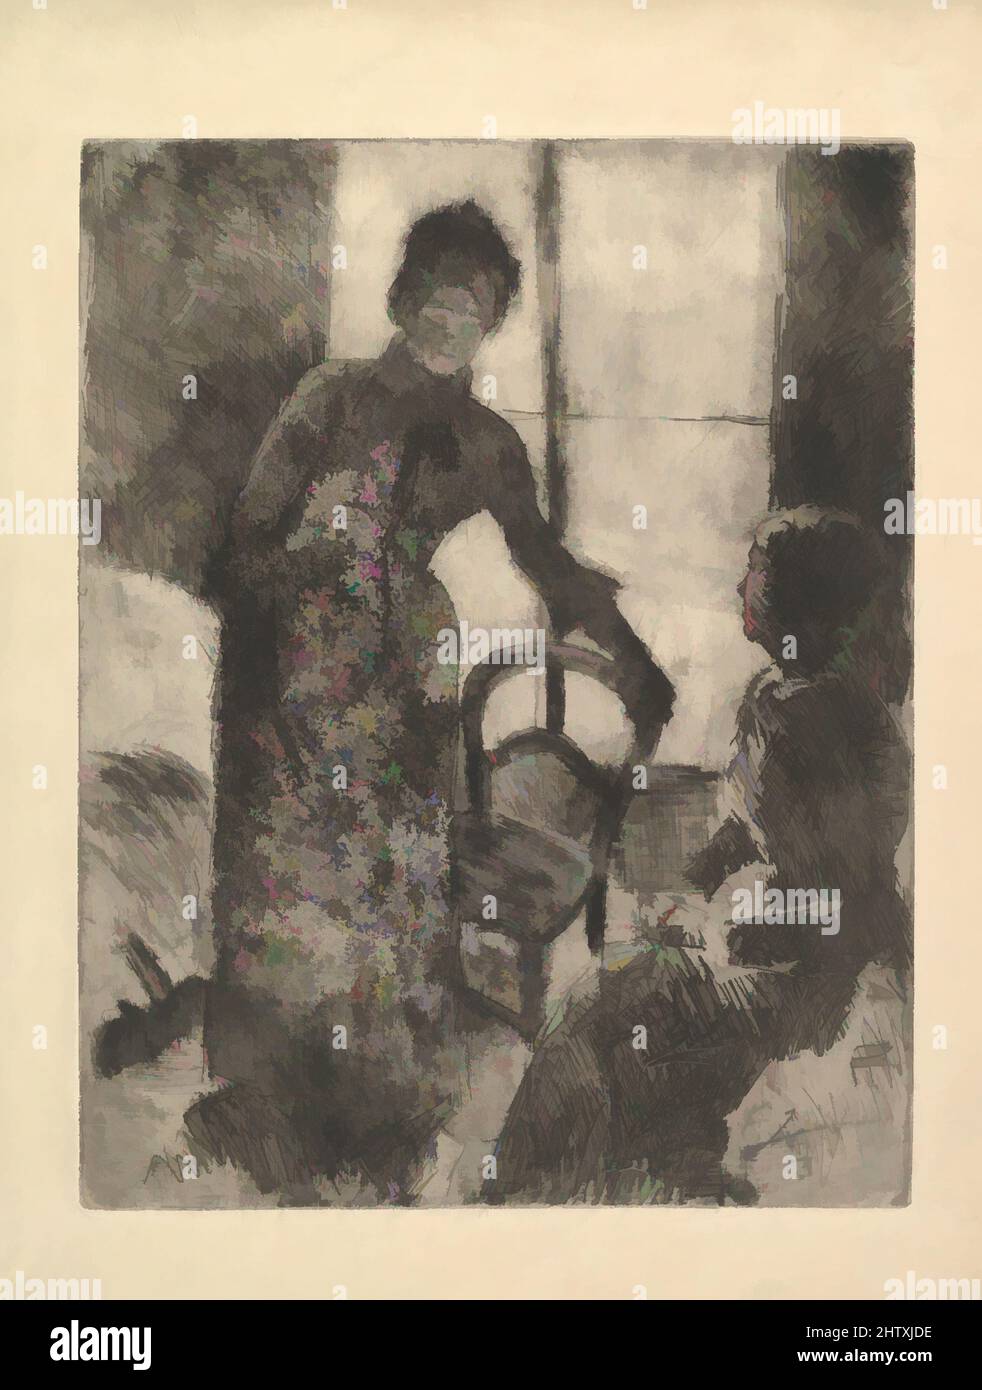 Art inspired by The Visitor, ca. 1881, Soft-ground, aquatint, etching, drypoint and fabric texture; third state of six, plate: 15 5/8 x 12 1/8 in. (39.7 x 30.8 cm), Prints, Mary Cassatt (American, Pittsburgh, Pennsylvania 1844–1926 Le Mesnil-Théribus, Oise, Classic works modernized by Artotop with a splash of modernity. Shapes, color and value, eye-catching visual impact on art. Emotions through freedom of artworks in a contemporary way. A timeless message pursuing a wildly creative new direction. Artists turning to the digital medium and creating the Artotop NFT Stock Photo